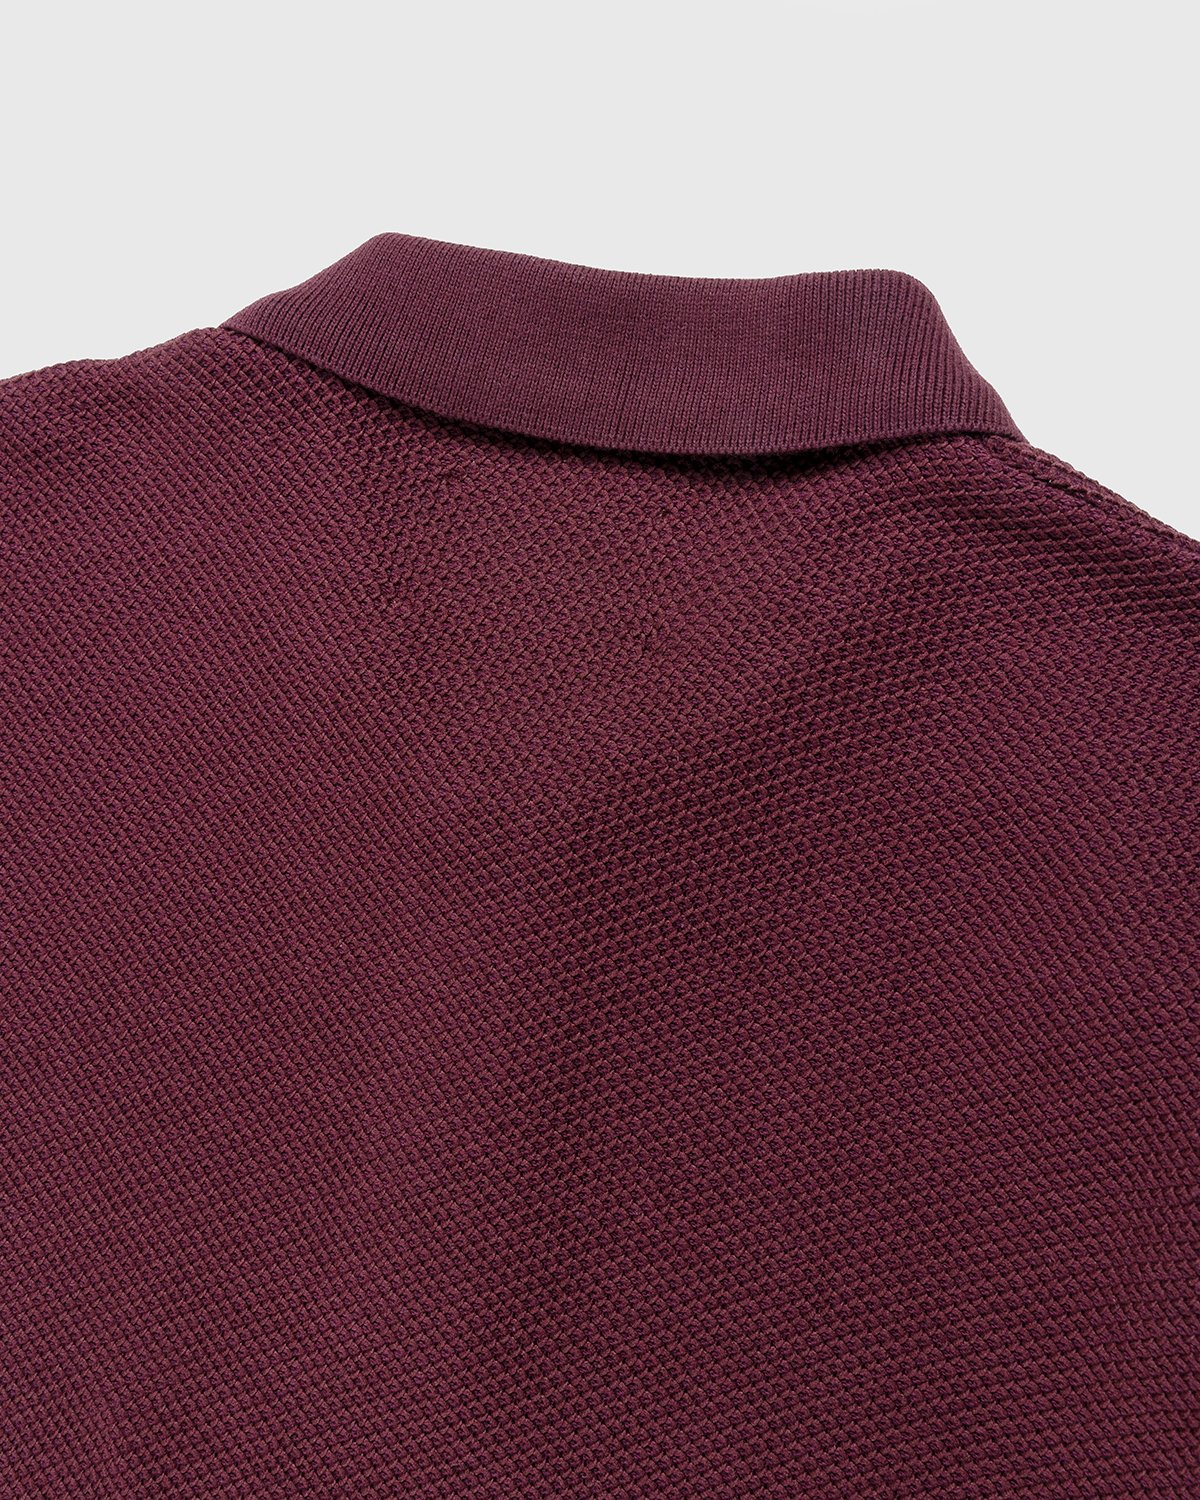 Highsnobiety - Knit Short-Sleeve Polo Bordeaux - Clothing - Brown - Image 3